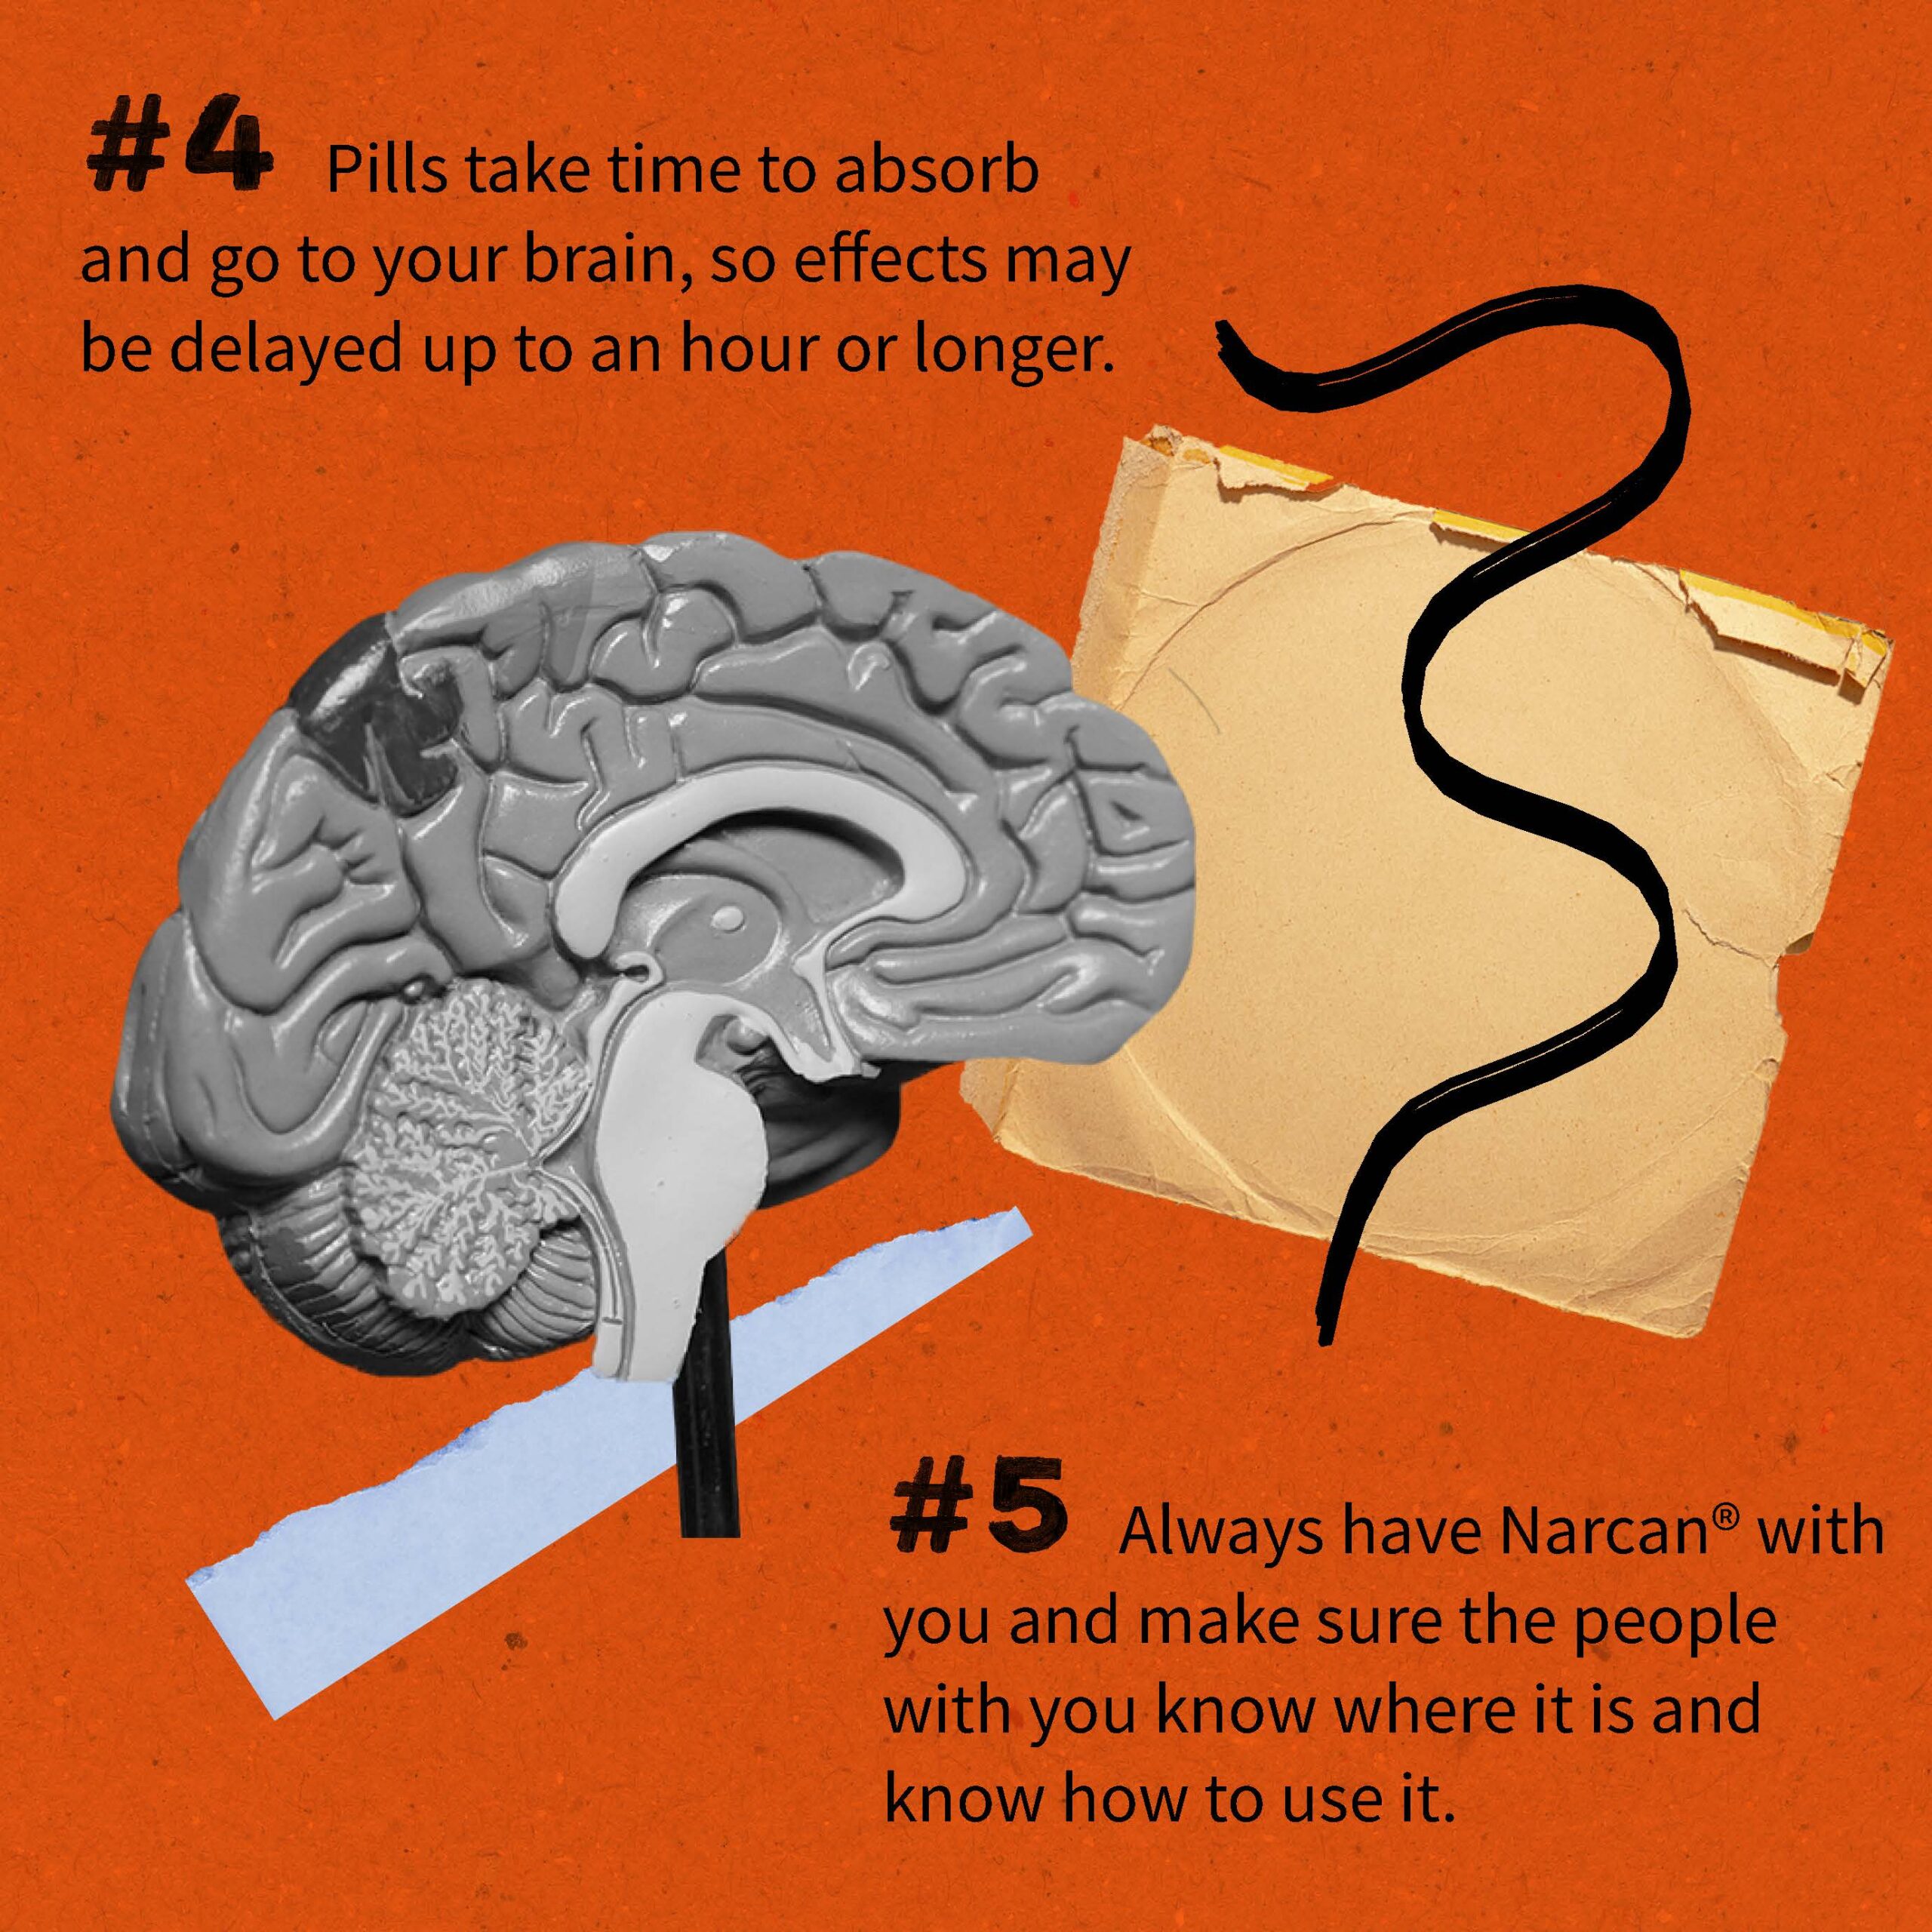 pills take time to absorb and go to your brain, so effects may be delayed up to an hour or longer